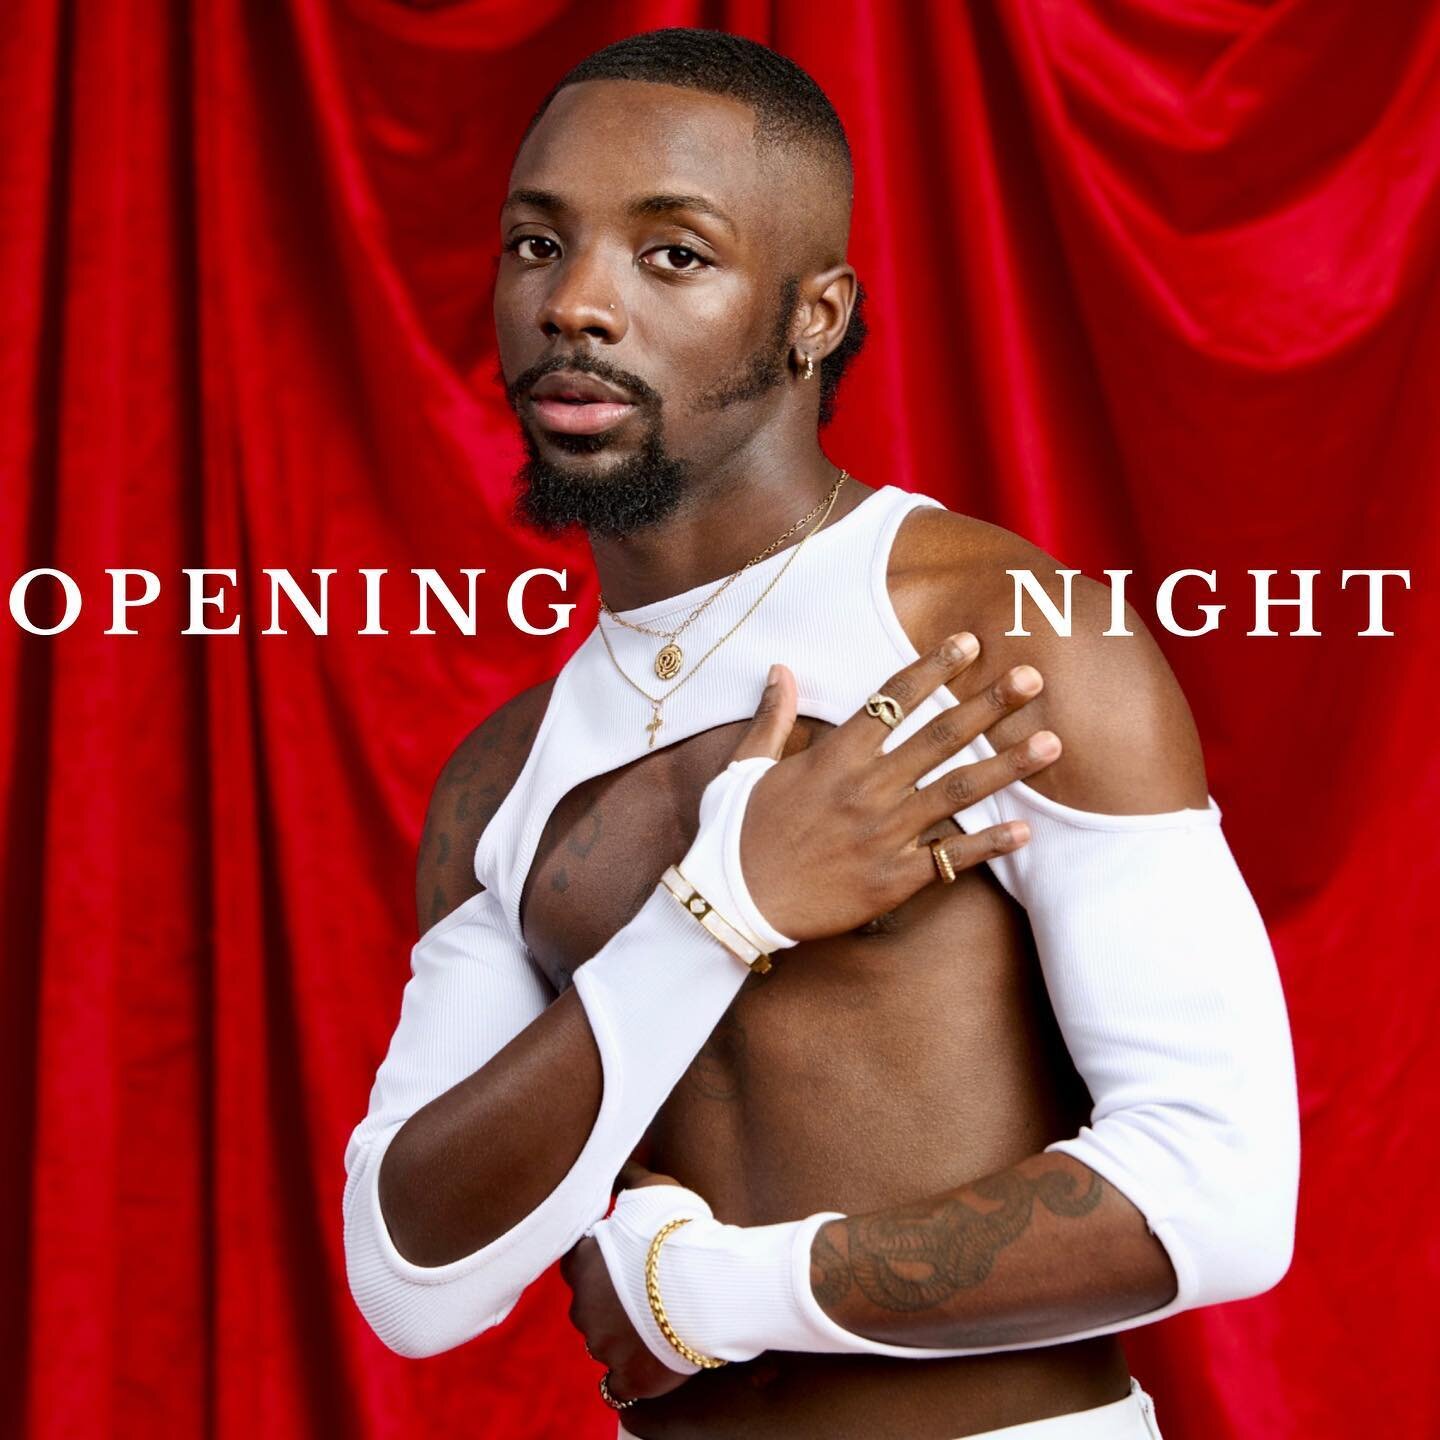 Our Director of Marketing, Smitty, Dropped his DEBUT EP. 
&ldquo;Opening Night‼️❤️🌹&rdquo;
Now available on all major streaming platforms! 🎧🎵🔥

Show him some love &amp; support!
https://smittyopeningnight.lsnto.me/openingnight

#stream #share #ep